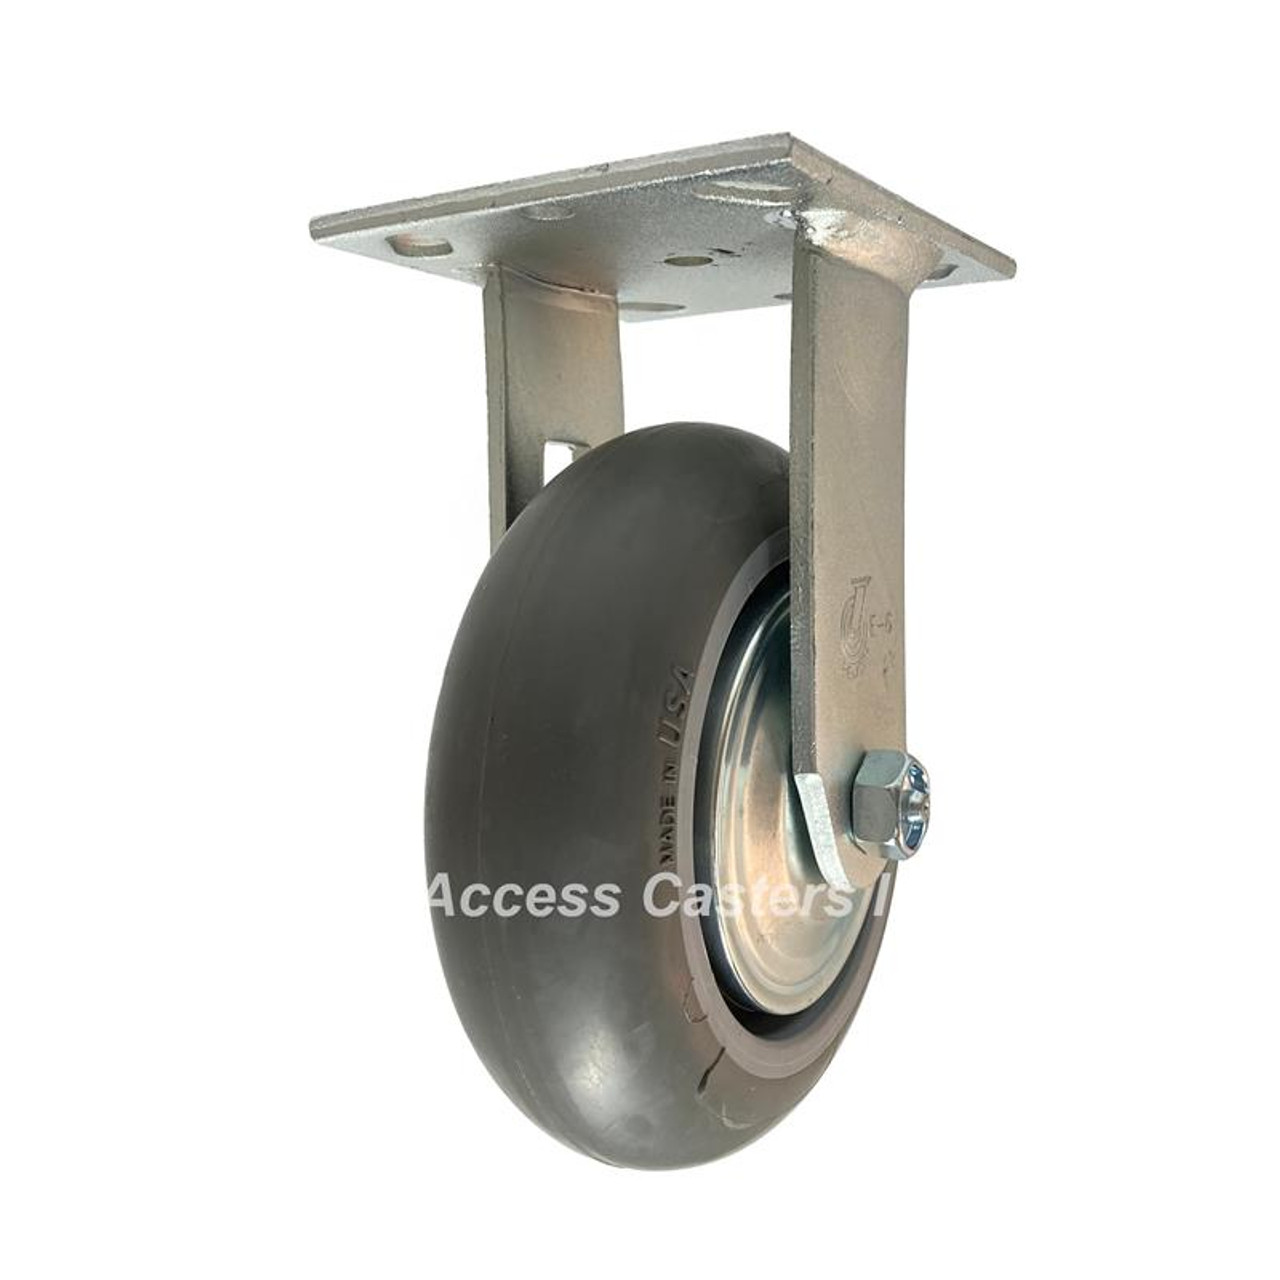 6SPRDR-TG 6" Rigid Plate Caster, TPR Round Wheel with Thread Guards